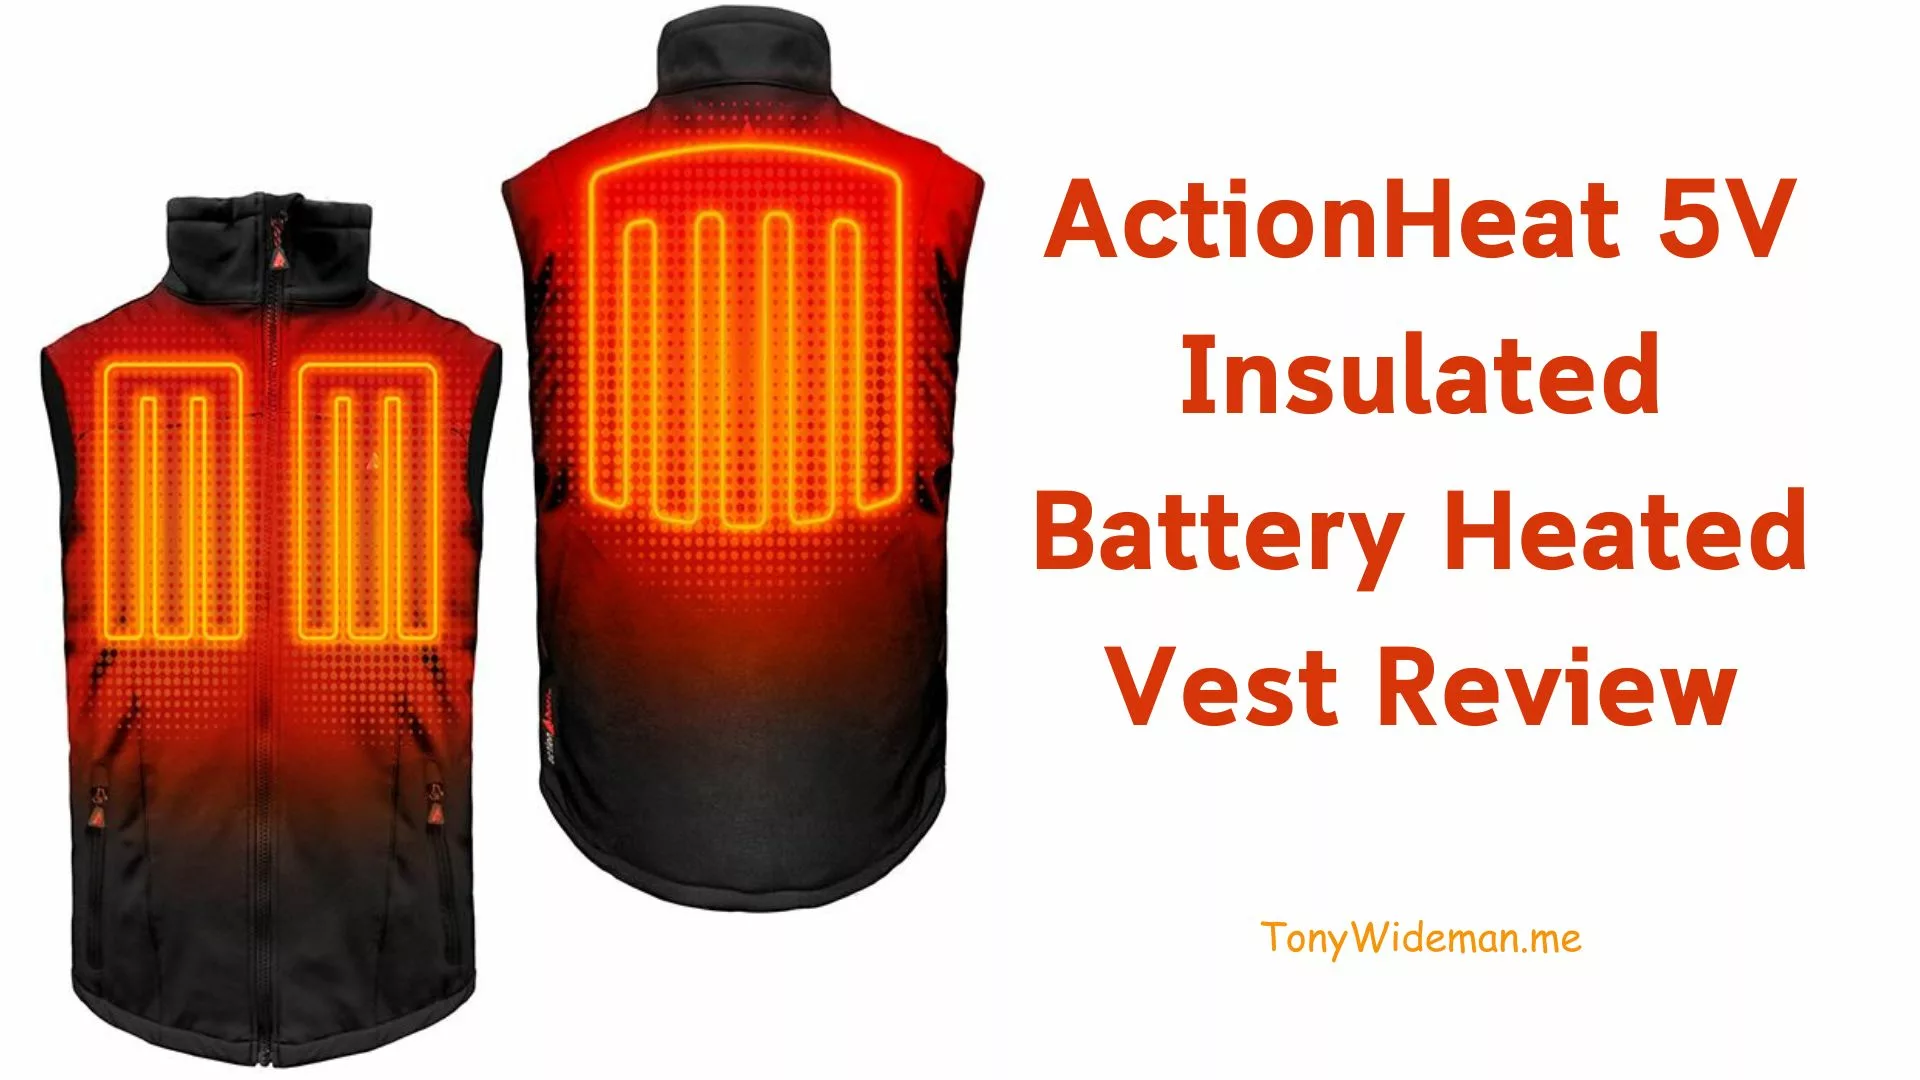 ActionHeat 5V Insulated Battery Heated Vest Review